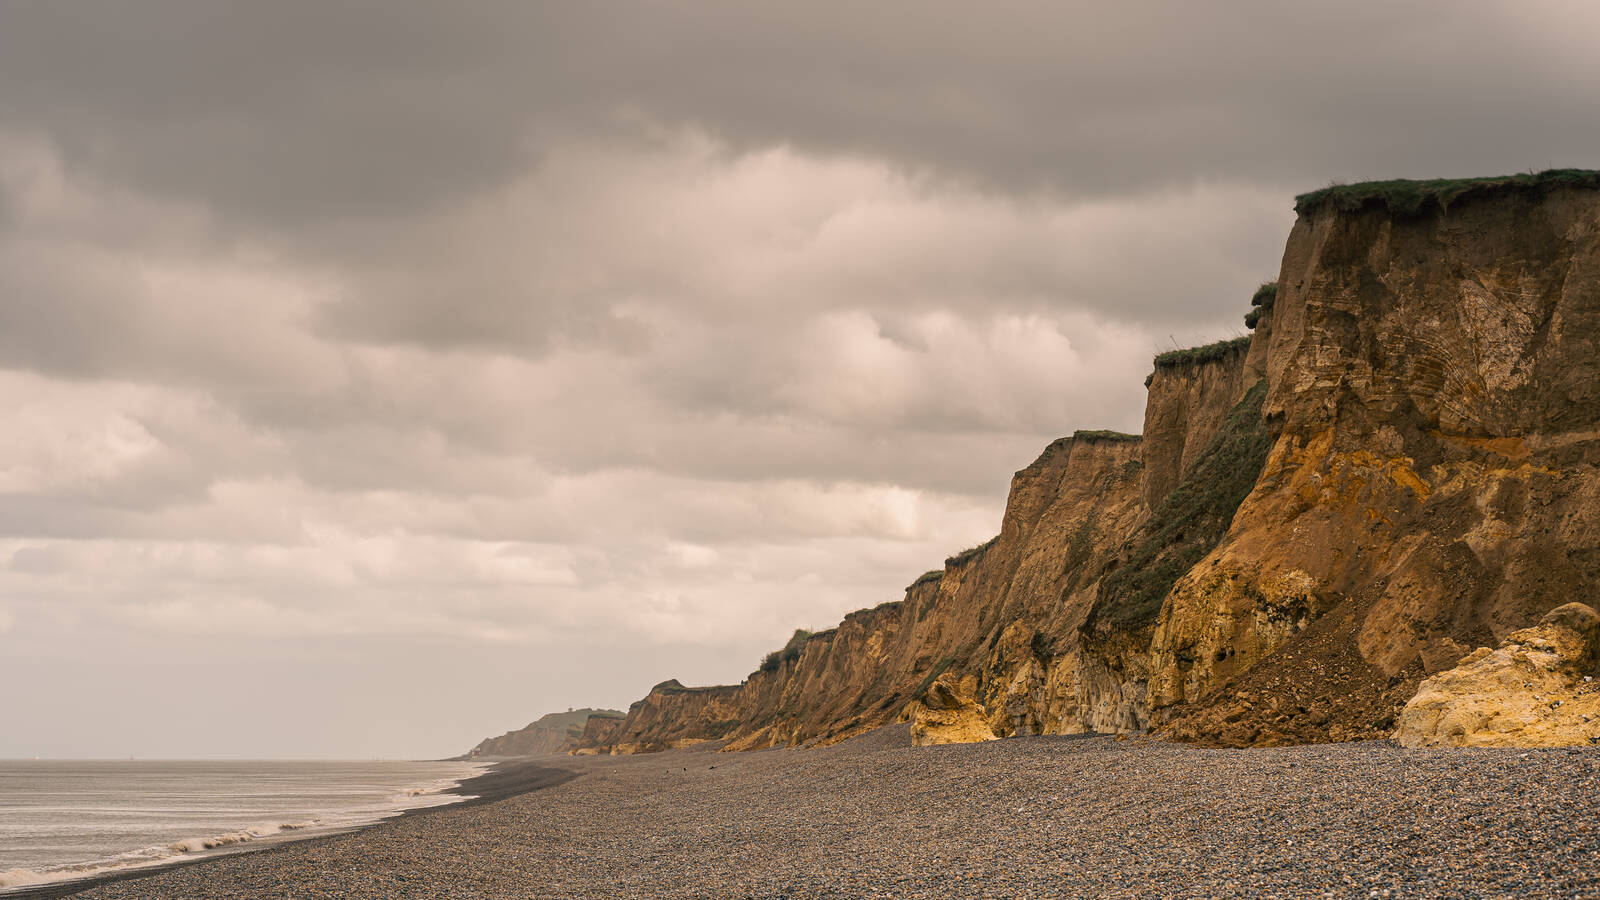 Image of Weybourne beach and clifftop by James Billings.